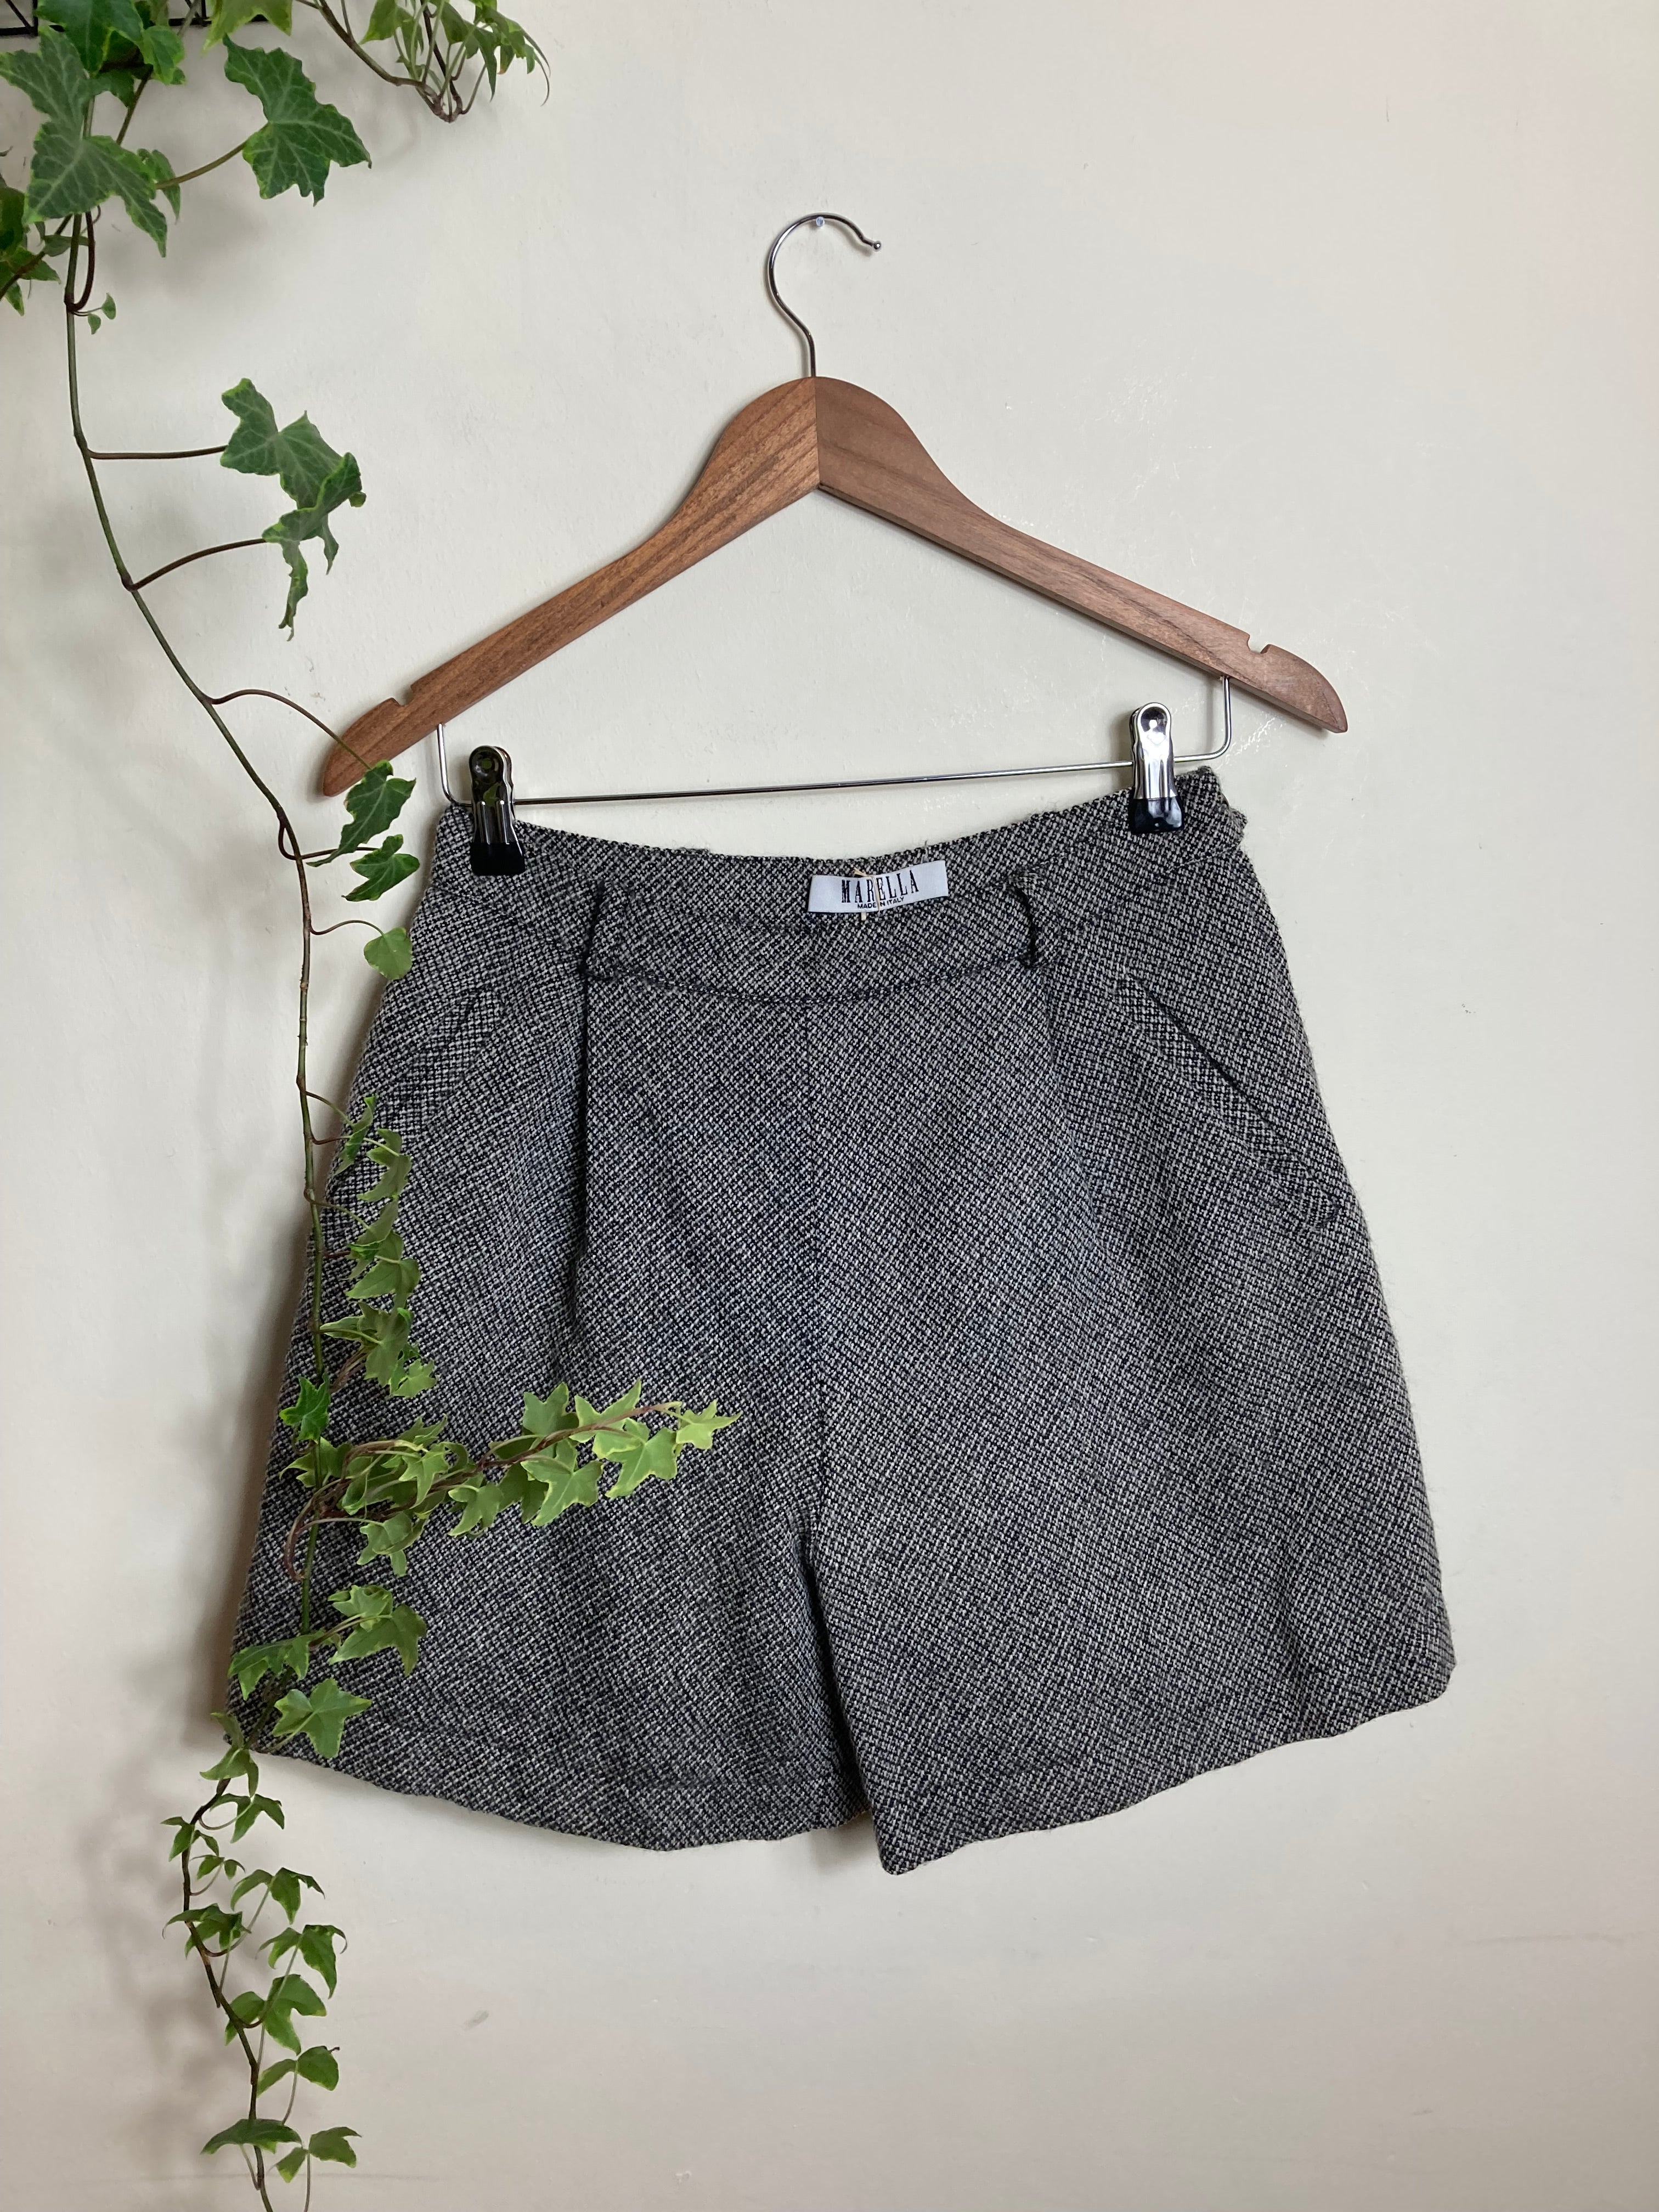 Tailored wool shorts - Women's Clothing Online Made in Italy